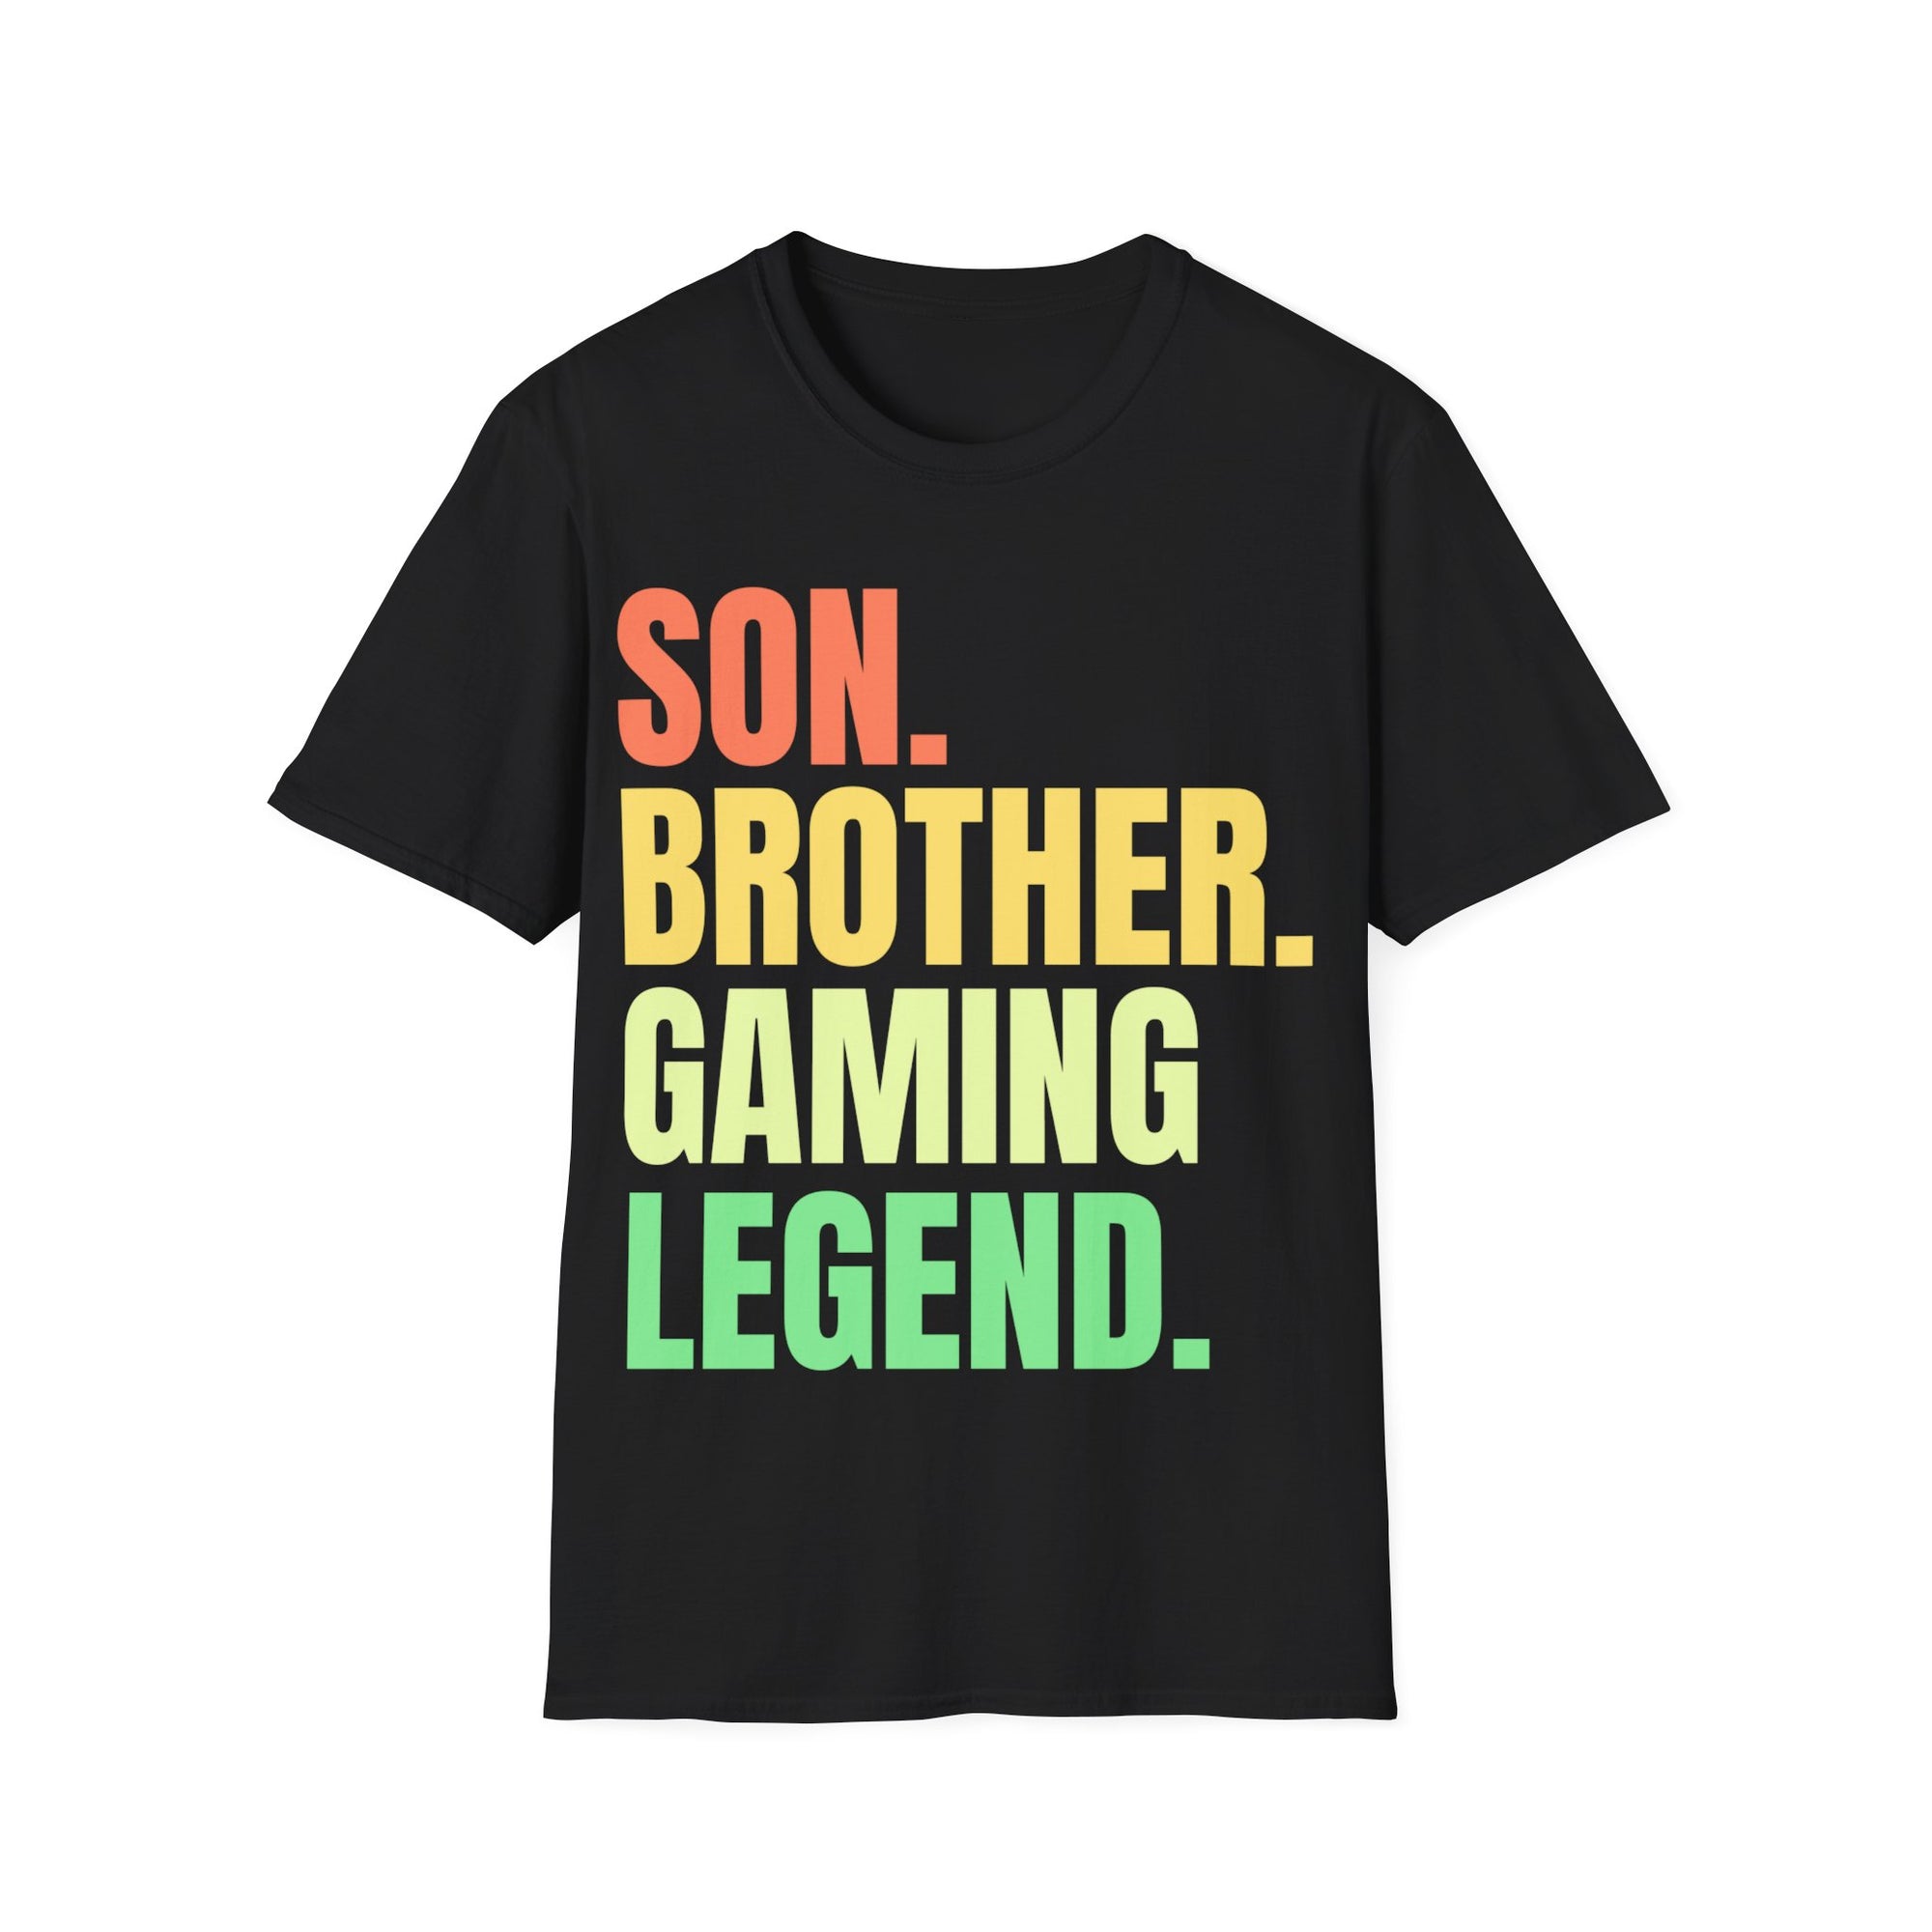 Son Brother Gaming Legend - T-shirt